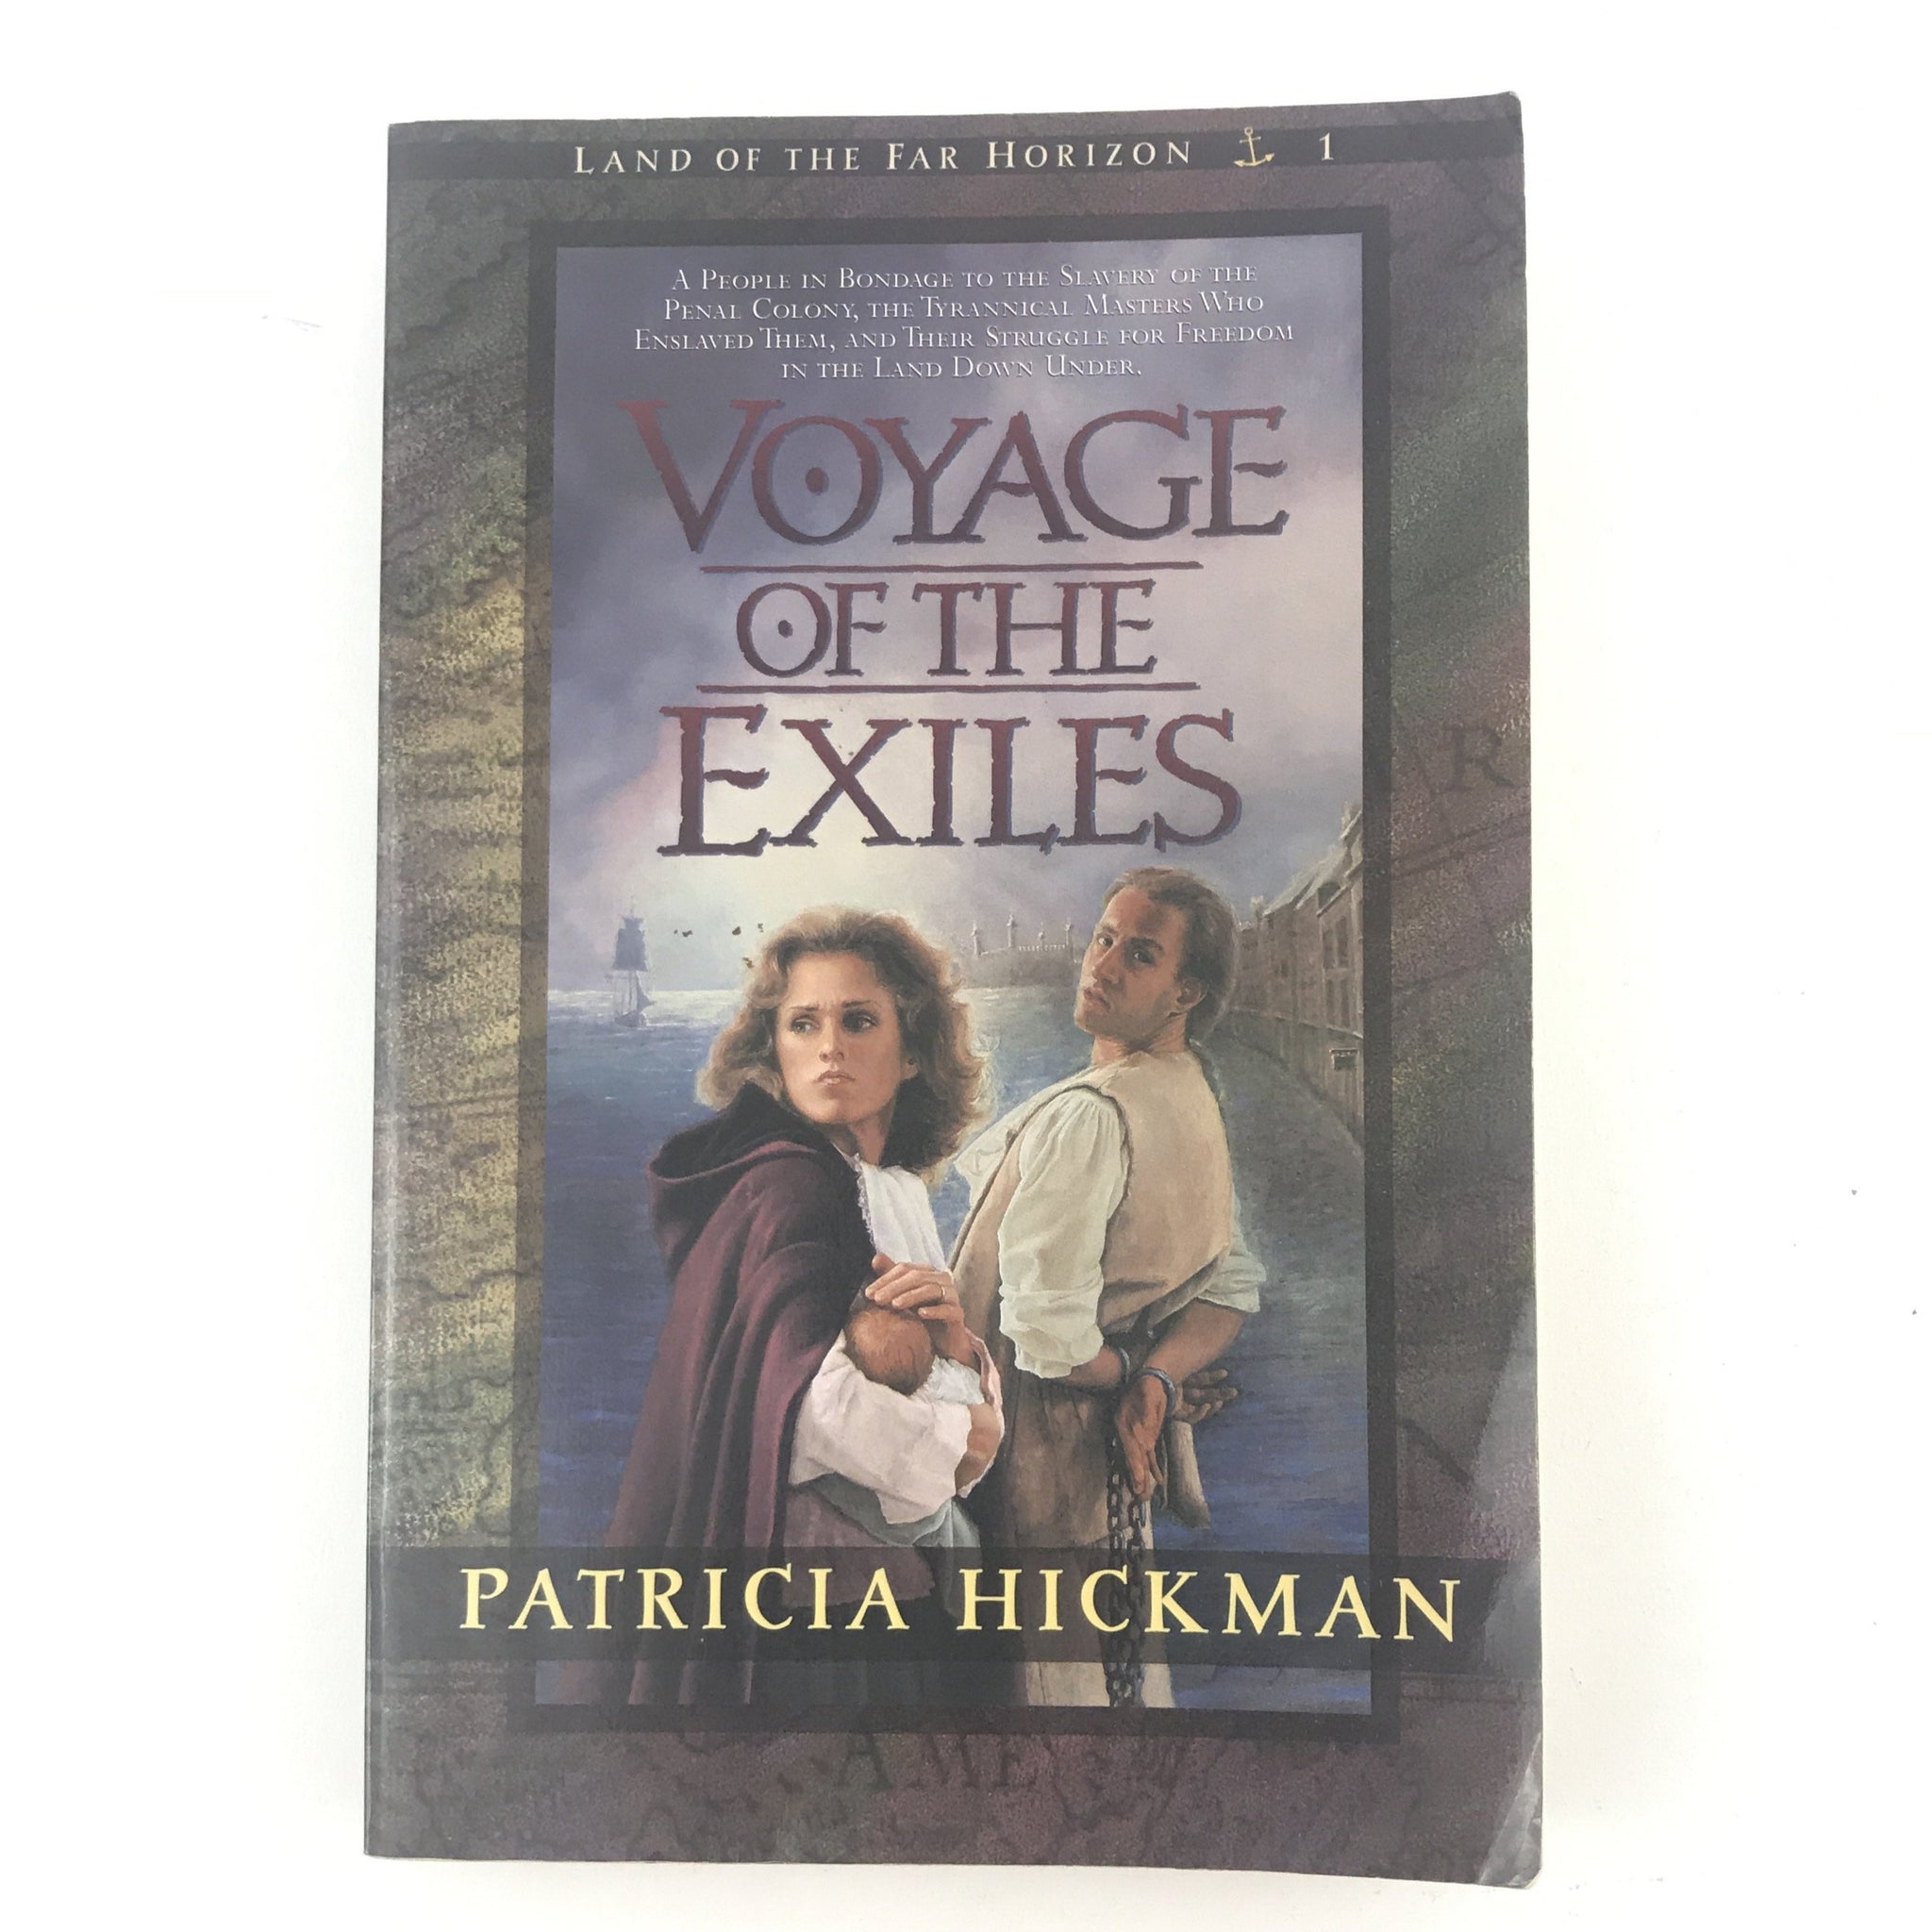 Voyage Of The Exiles by Patricia Hickman - Land Of The Far Horizon Book 1